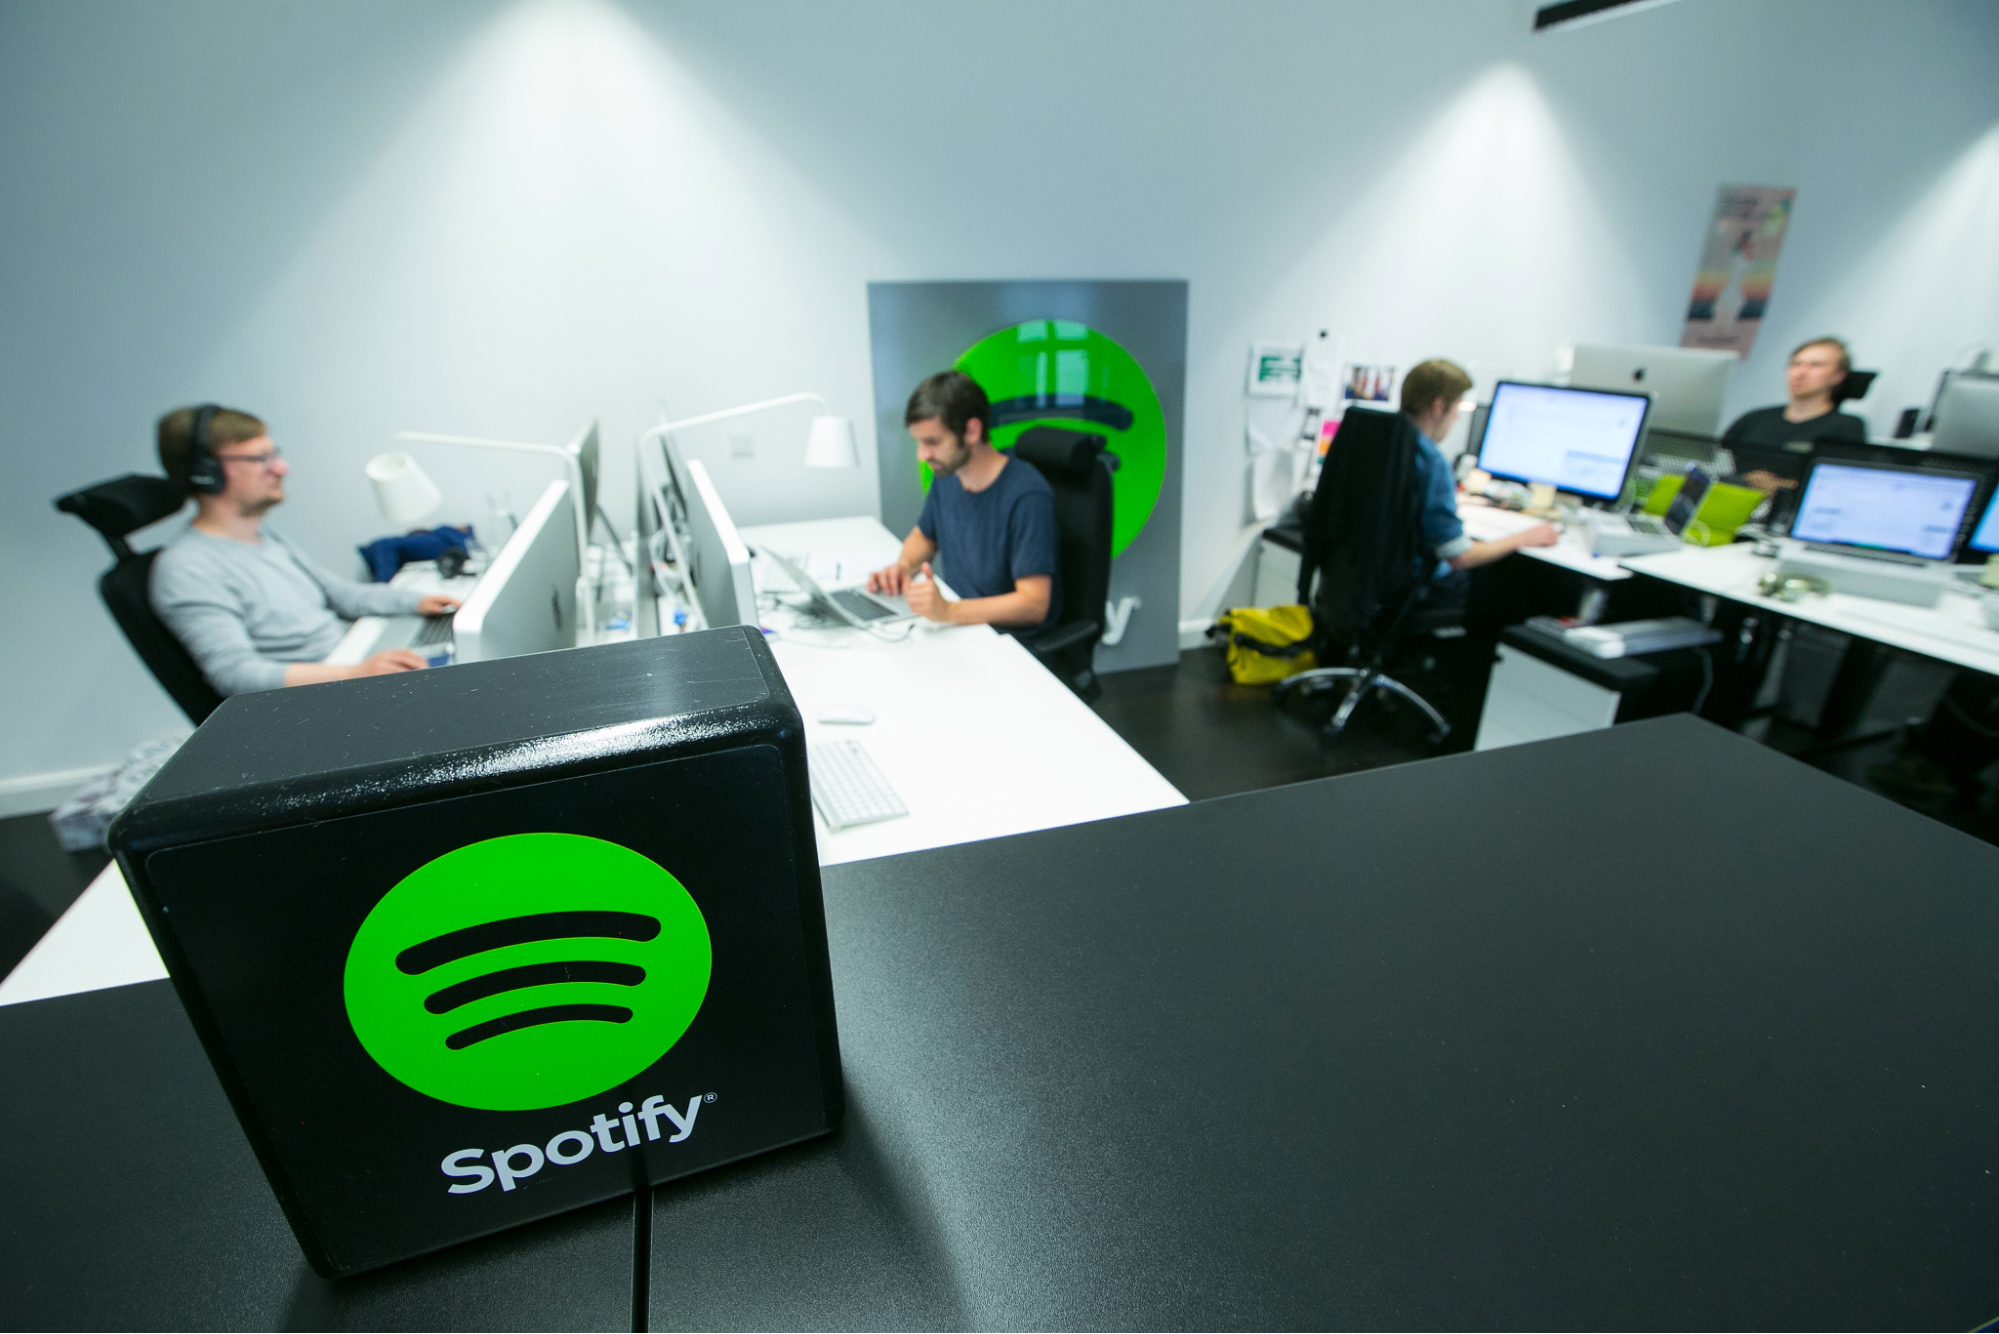 The image shows Spotify’s working space where employees are working together. 